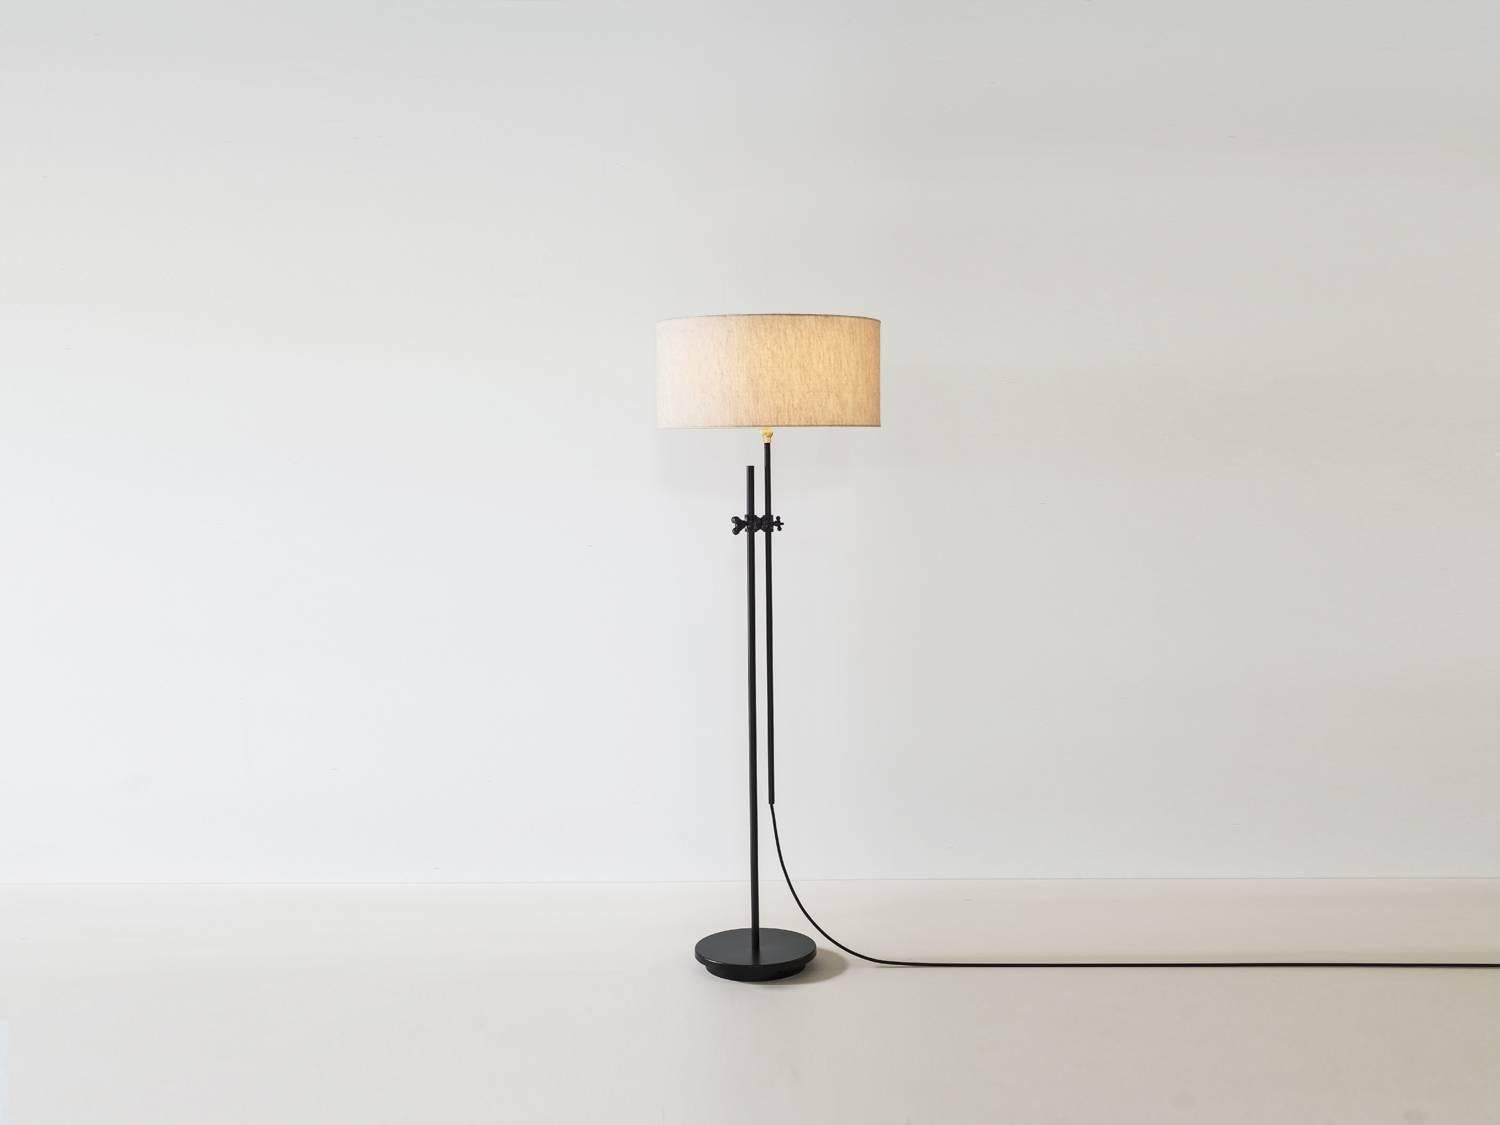 The workstead floor lamp is adjustable from 52-68